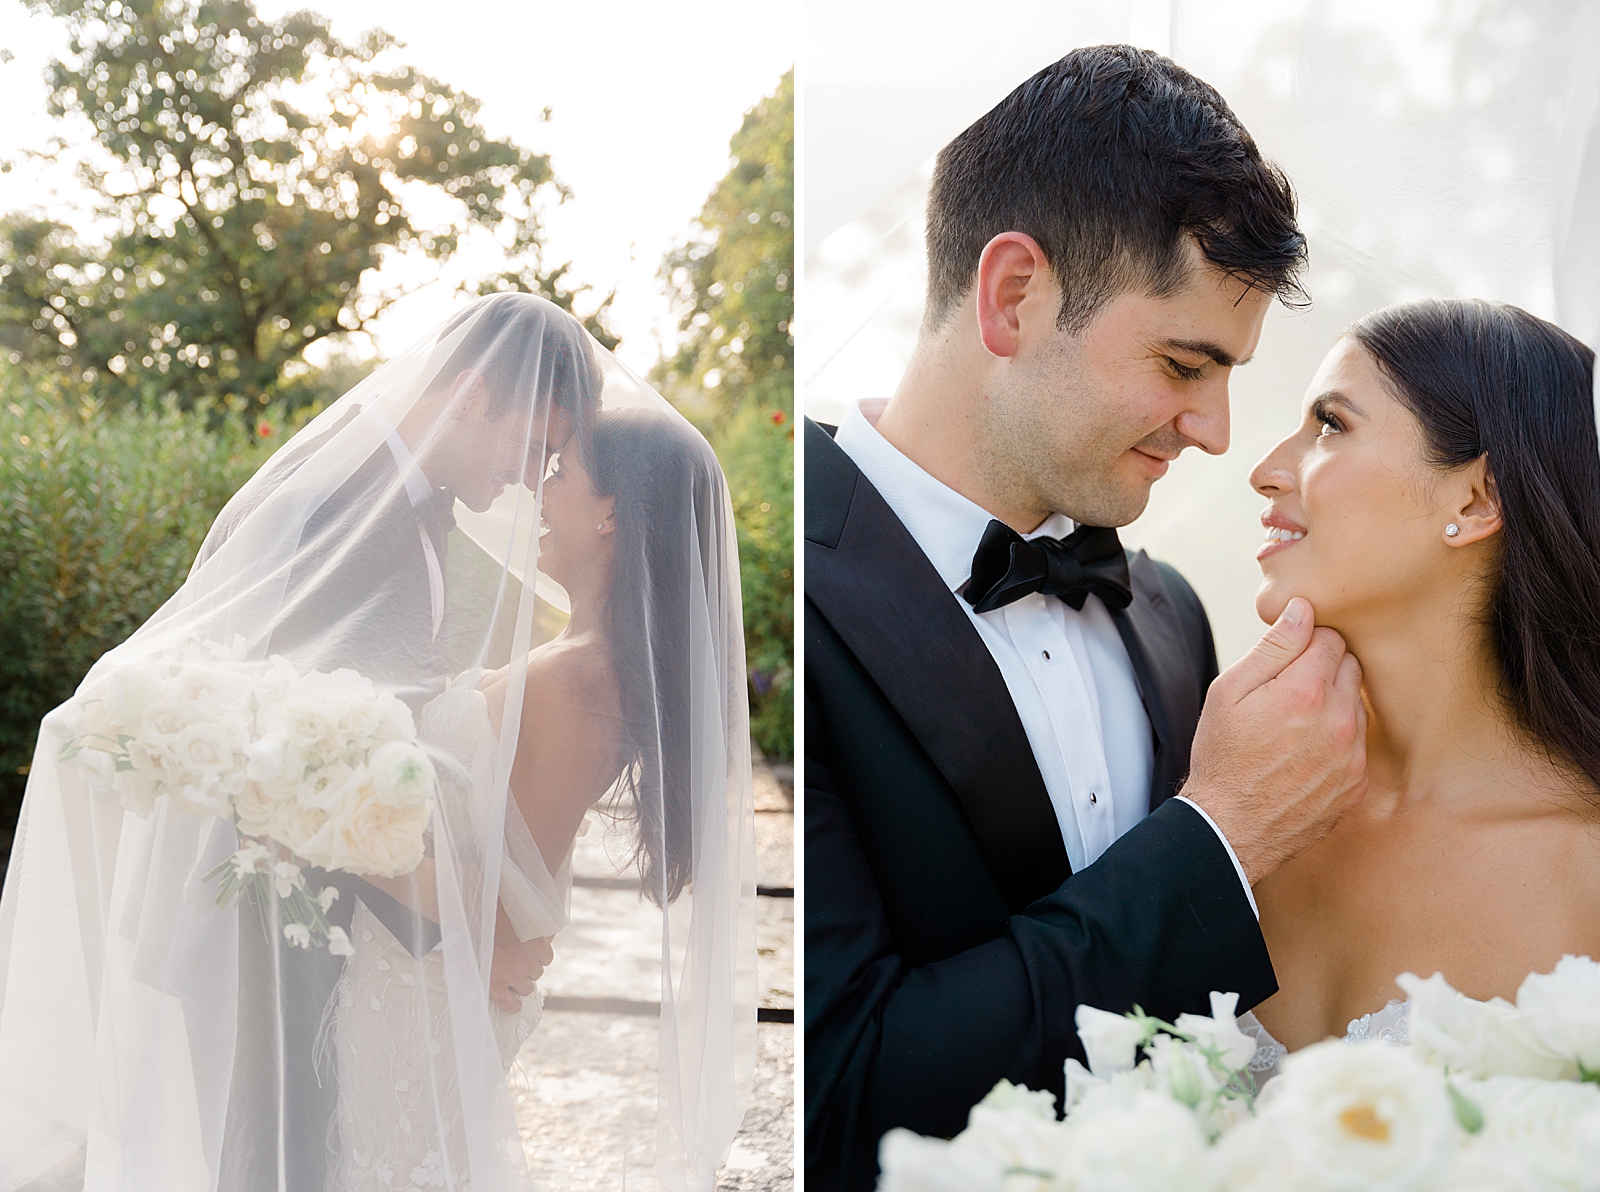 Left photo: The bride and groom are draped under the bride's veil as they smile nose to nose. 
Right photo: Upper body shot of the bride and groom smiling as they look into each other's eyes. 